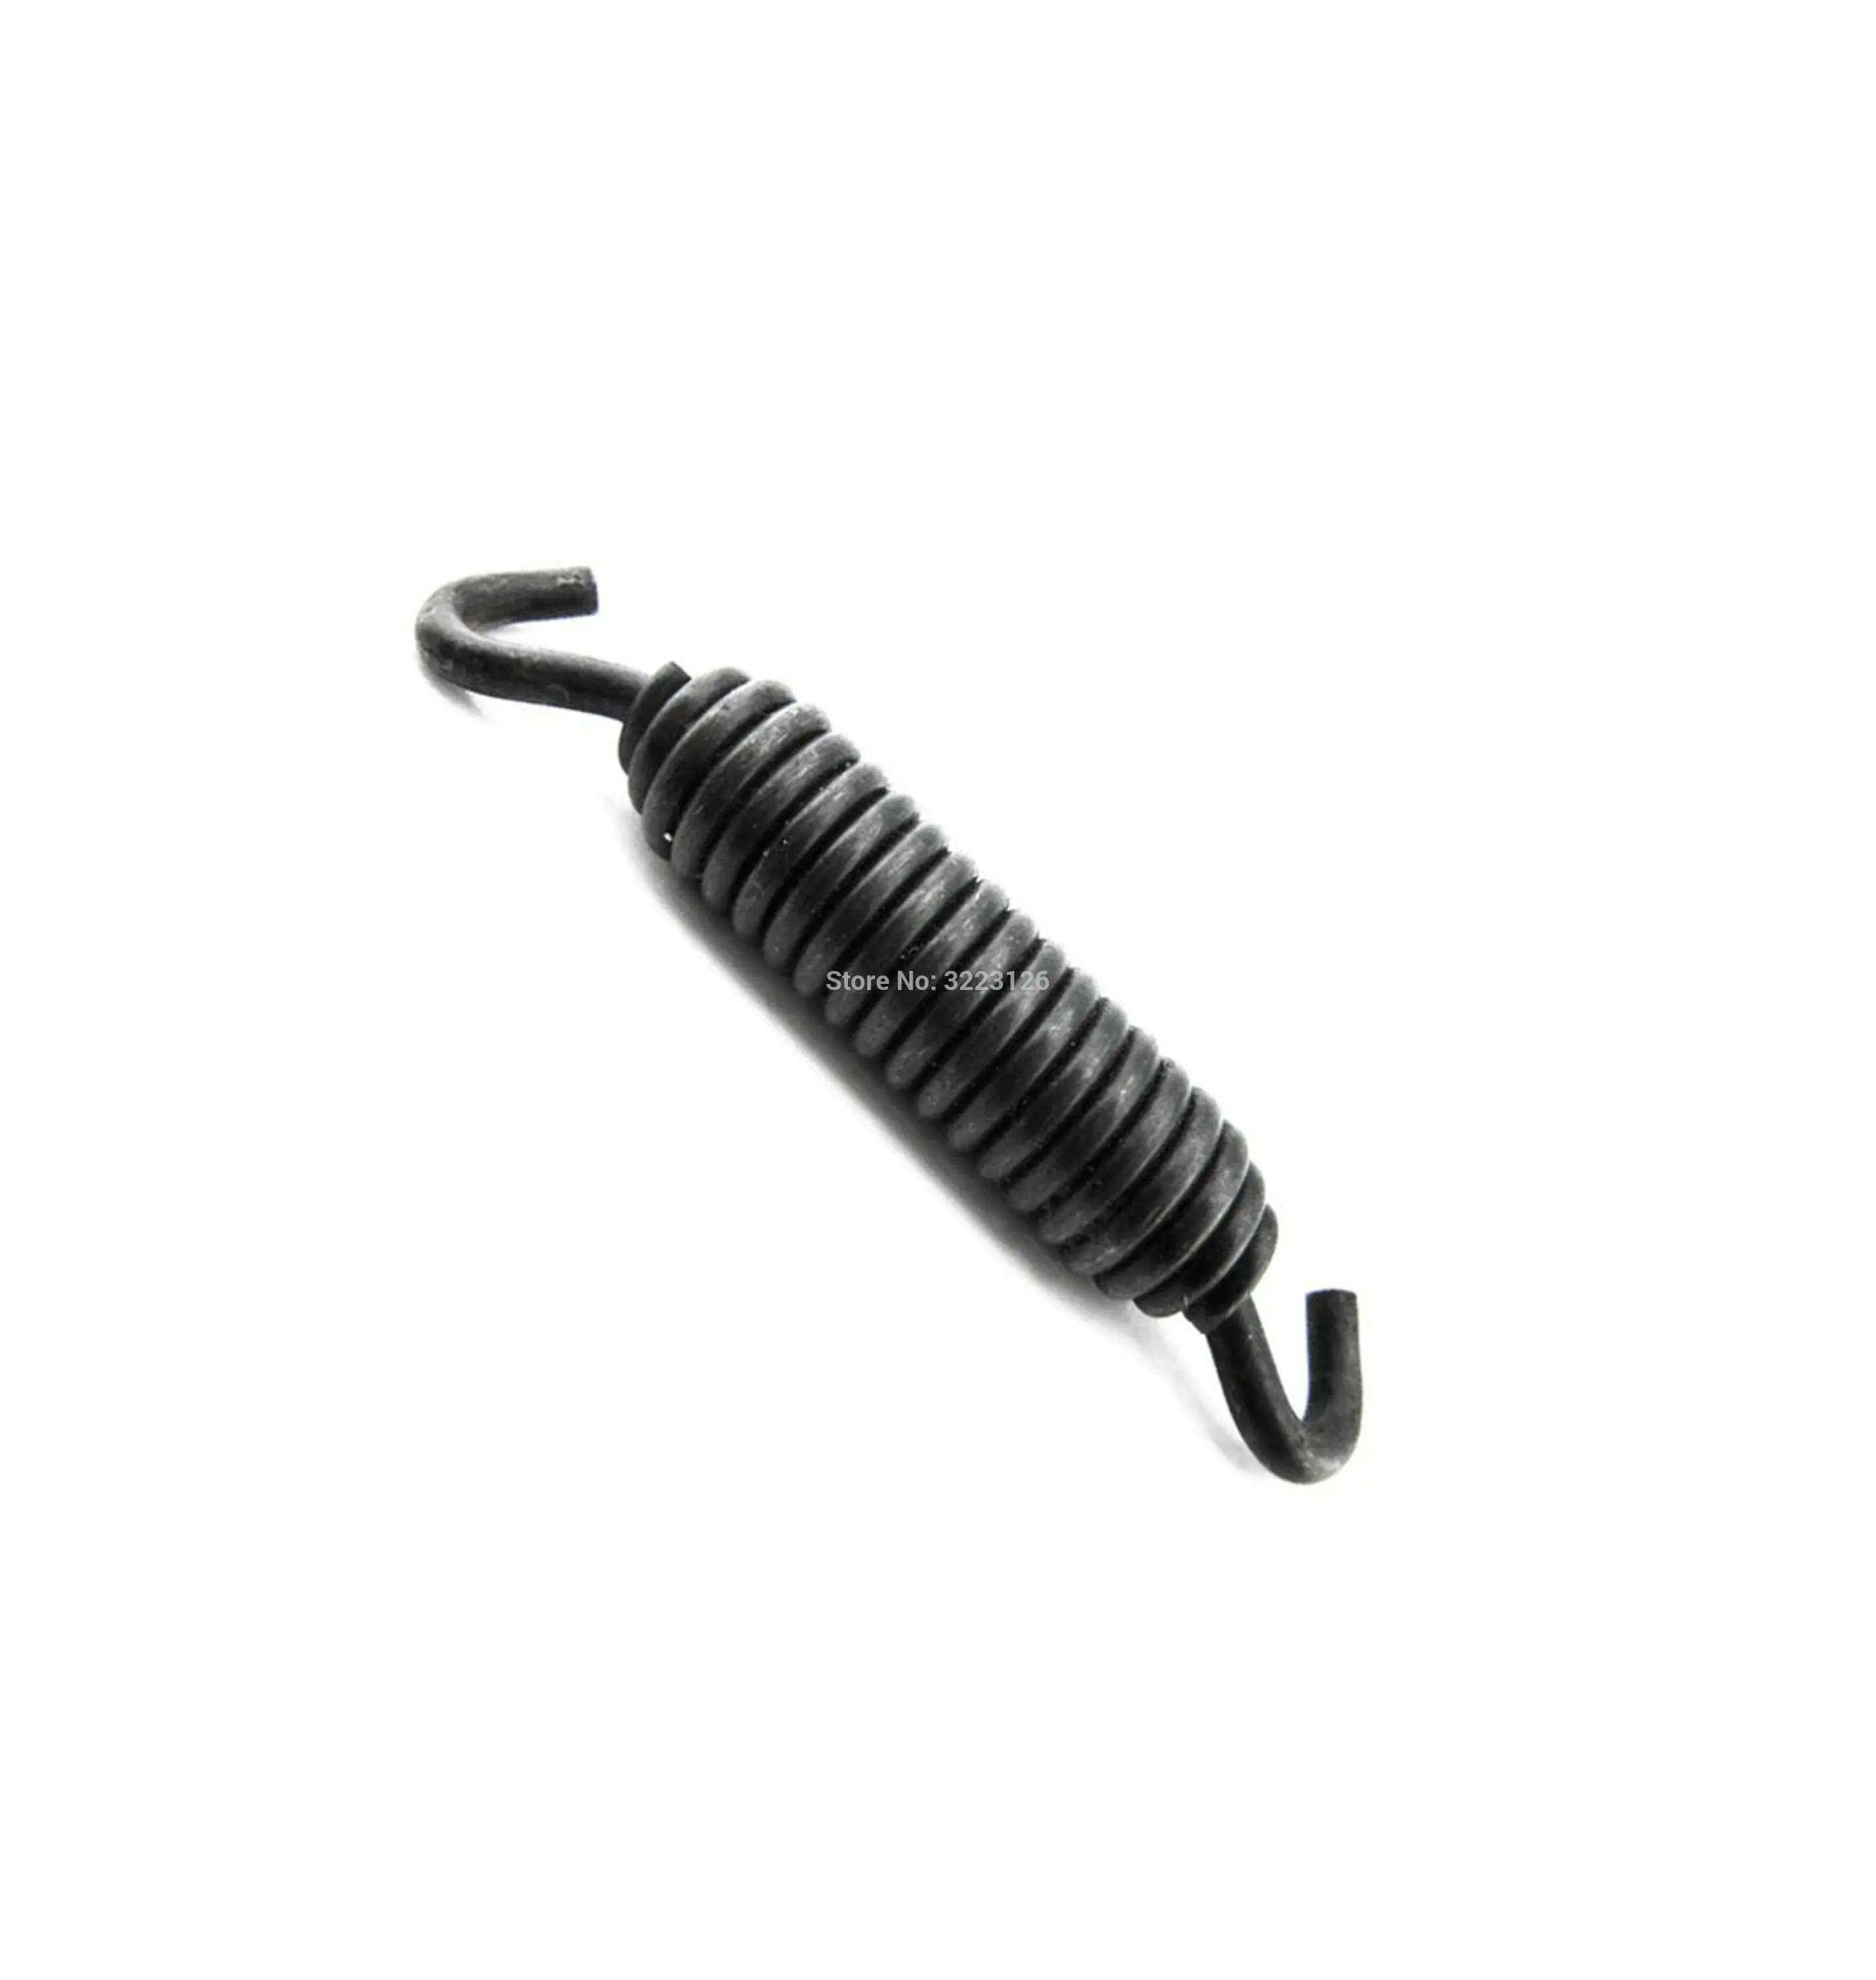 Motorcycle Spring Kickstand Spring Side Jiffy Stand Spring For Harley Davidson Sportster 1200 Xl1200 883 Xl883 Kickstand Spring 1200 Sportsterharley Sportster Xl1200 Aliexpress